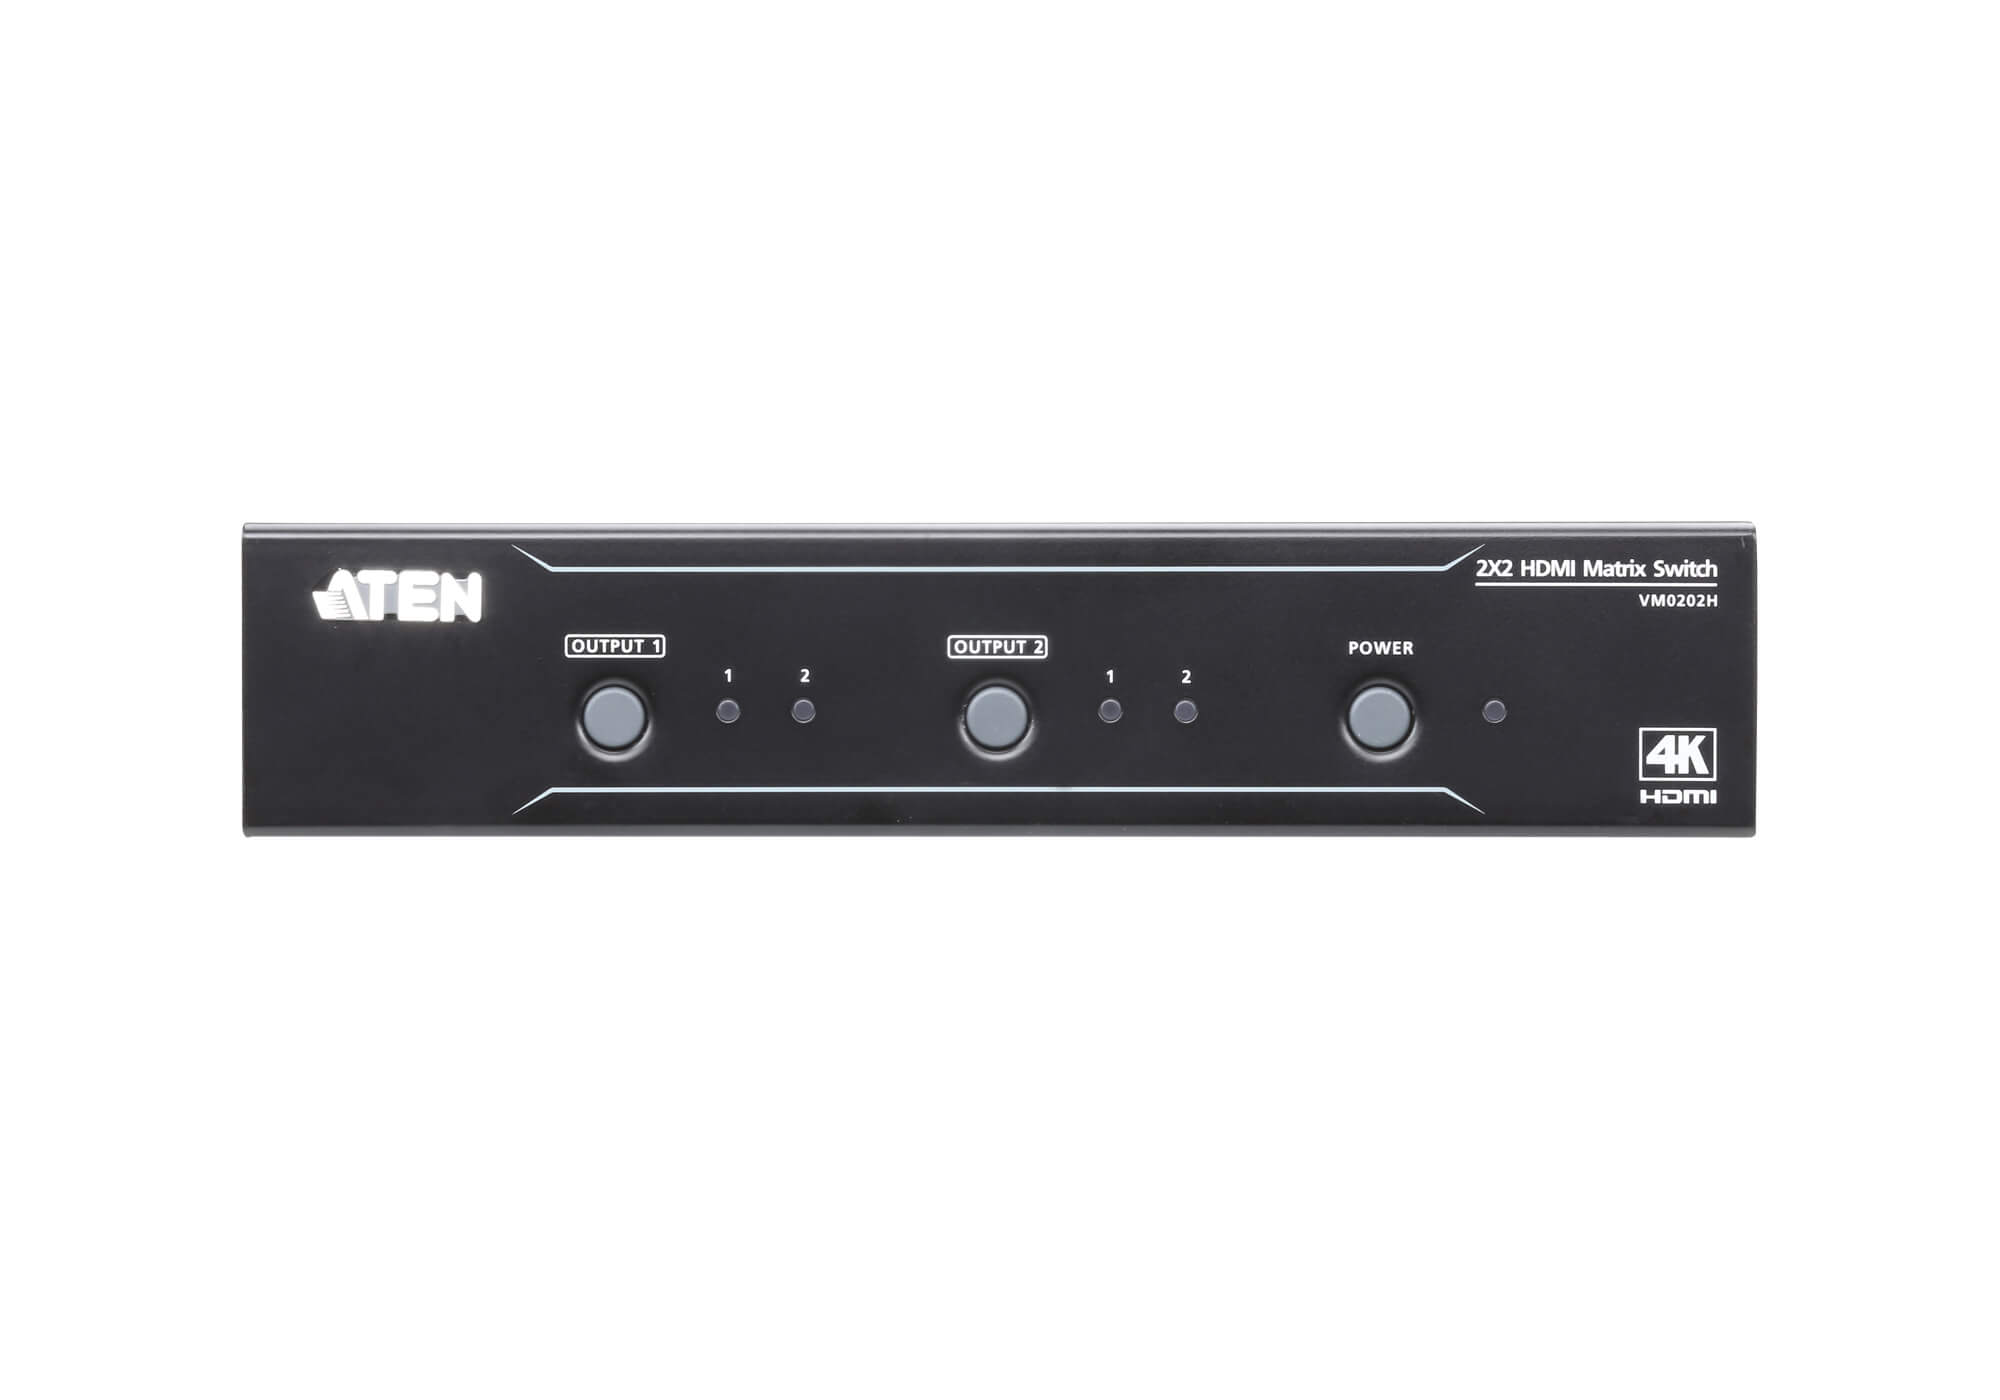 Aten 2×2 4K HDMI Matrix, control via front-panel pushbuttons, IR remote and RS232 control, EDID management